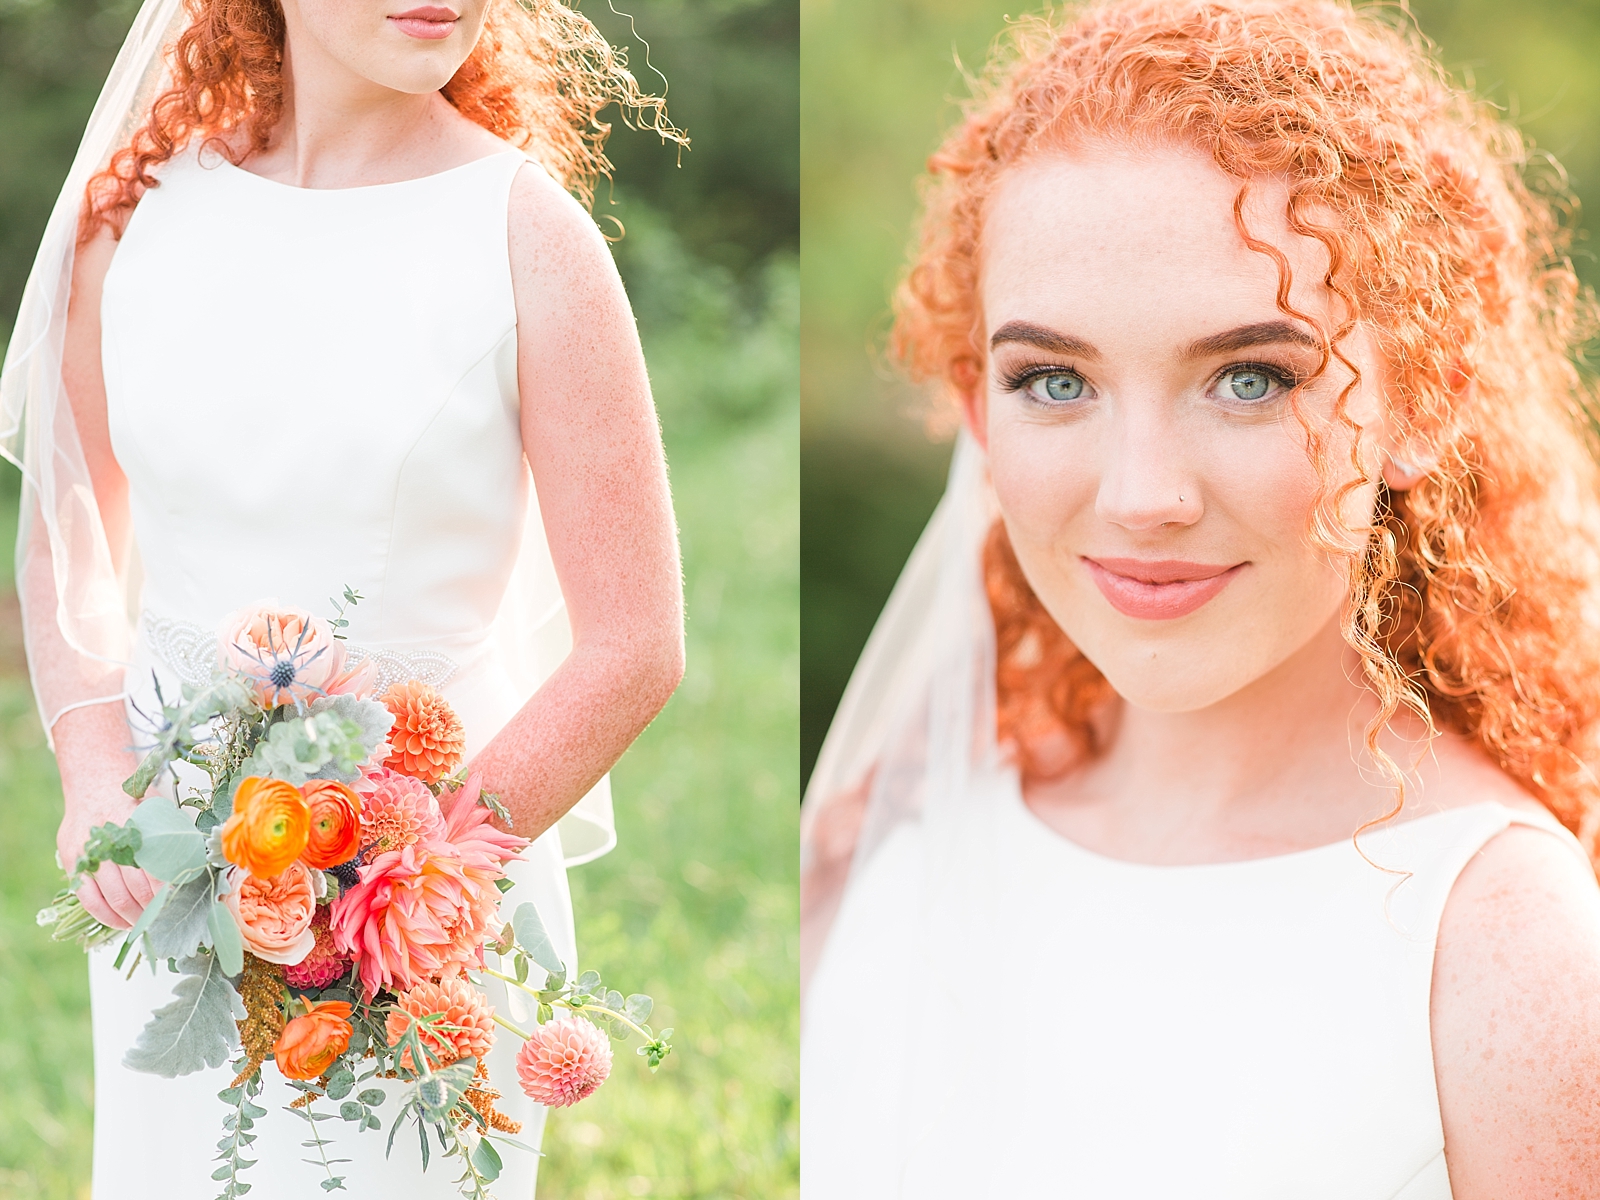 Chestnut Ridge Wedding bridal bouquet detail and bride with red curly hair and blue eyes looking at camera Photos